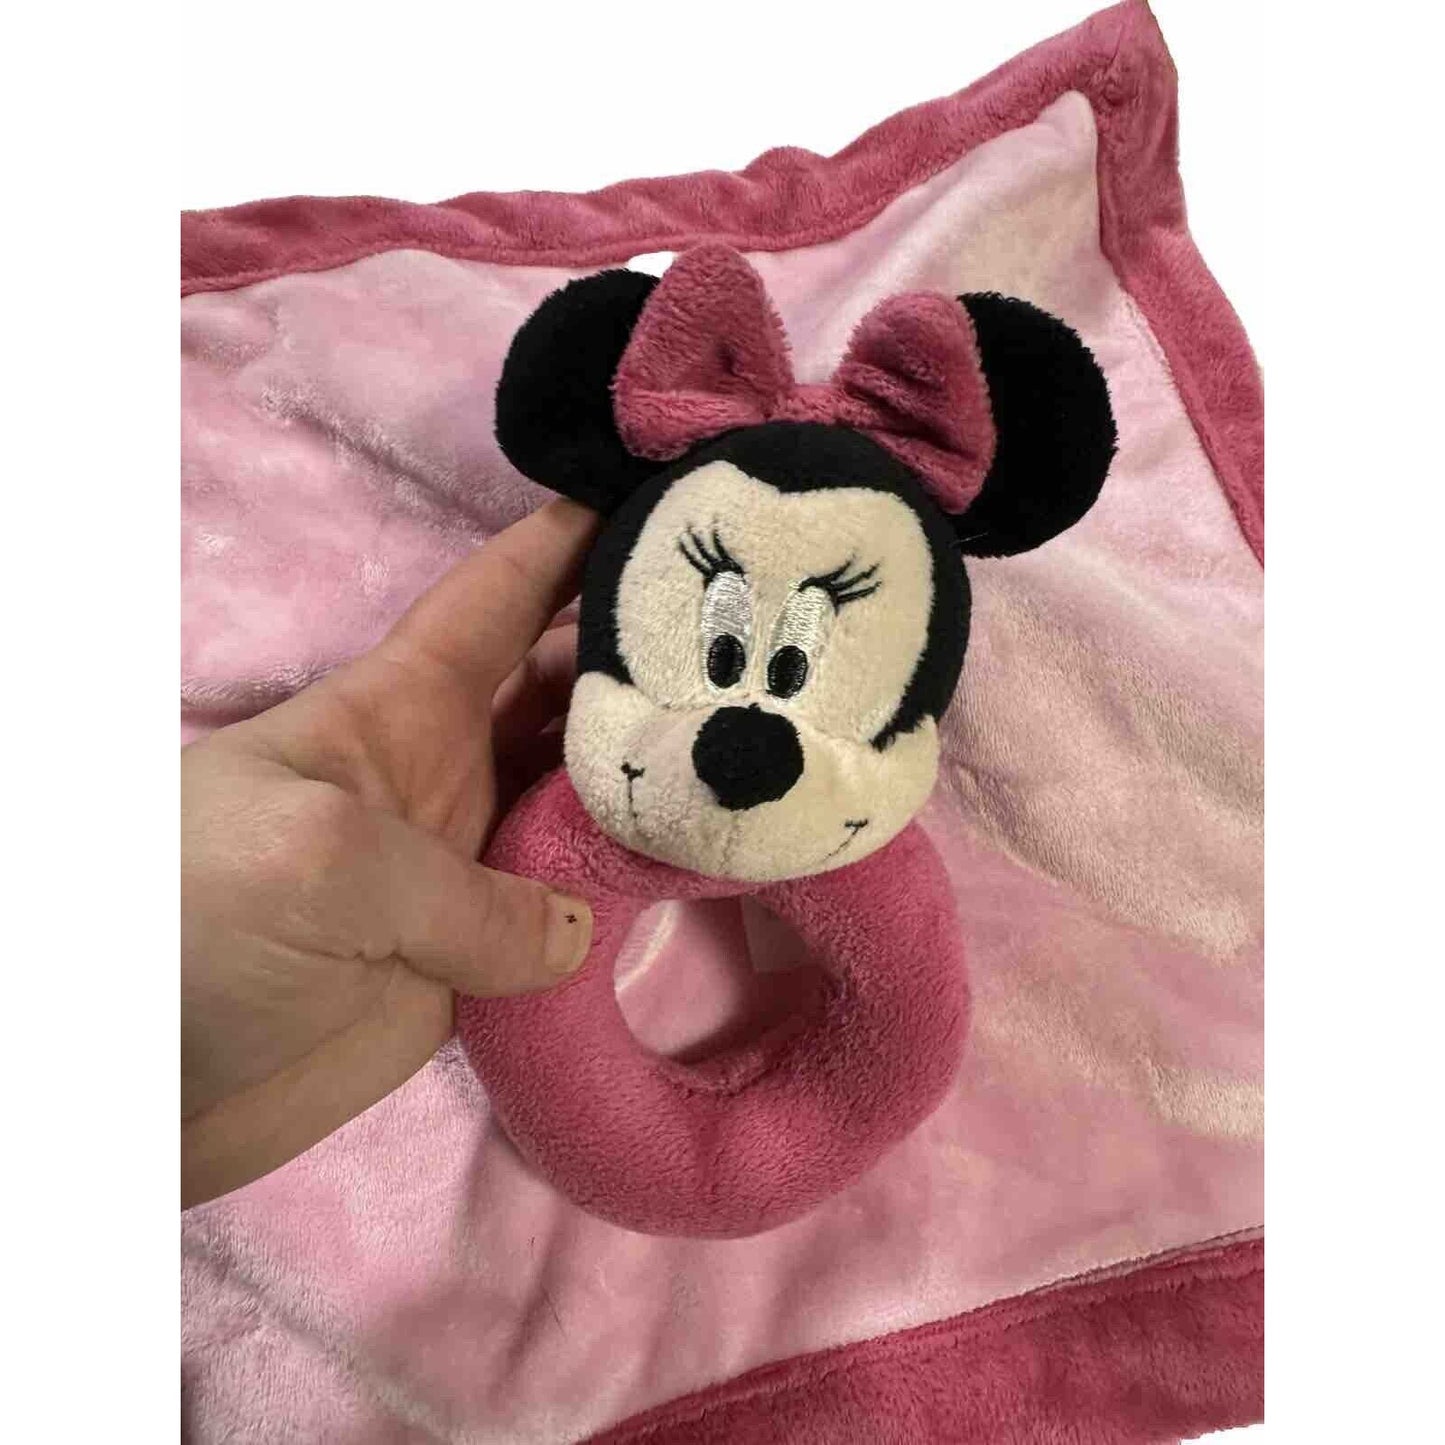 Disney Baby Minnie Mouse Security Blanket with Ring Rattle Lovey Pink 13x13